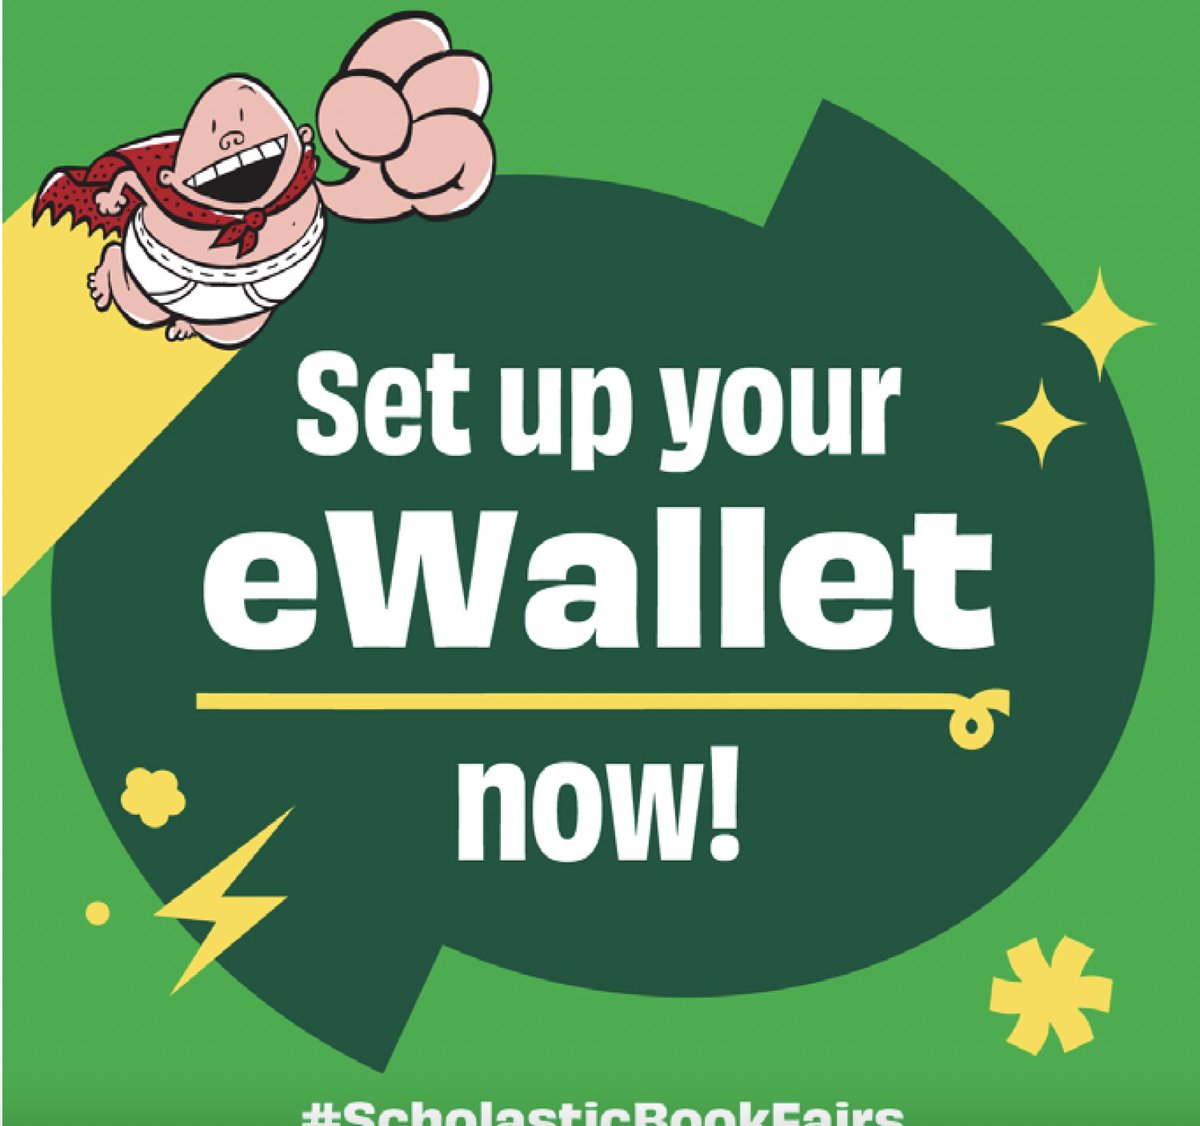 Don't forget to set up your student's eWallet account for cashless, stress-less shopping. Friends and family can even contribute funds! . Our fair open on May 13th #ScholasticBookFairs @YISDLibServices @EDGESlib